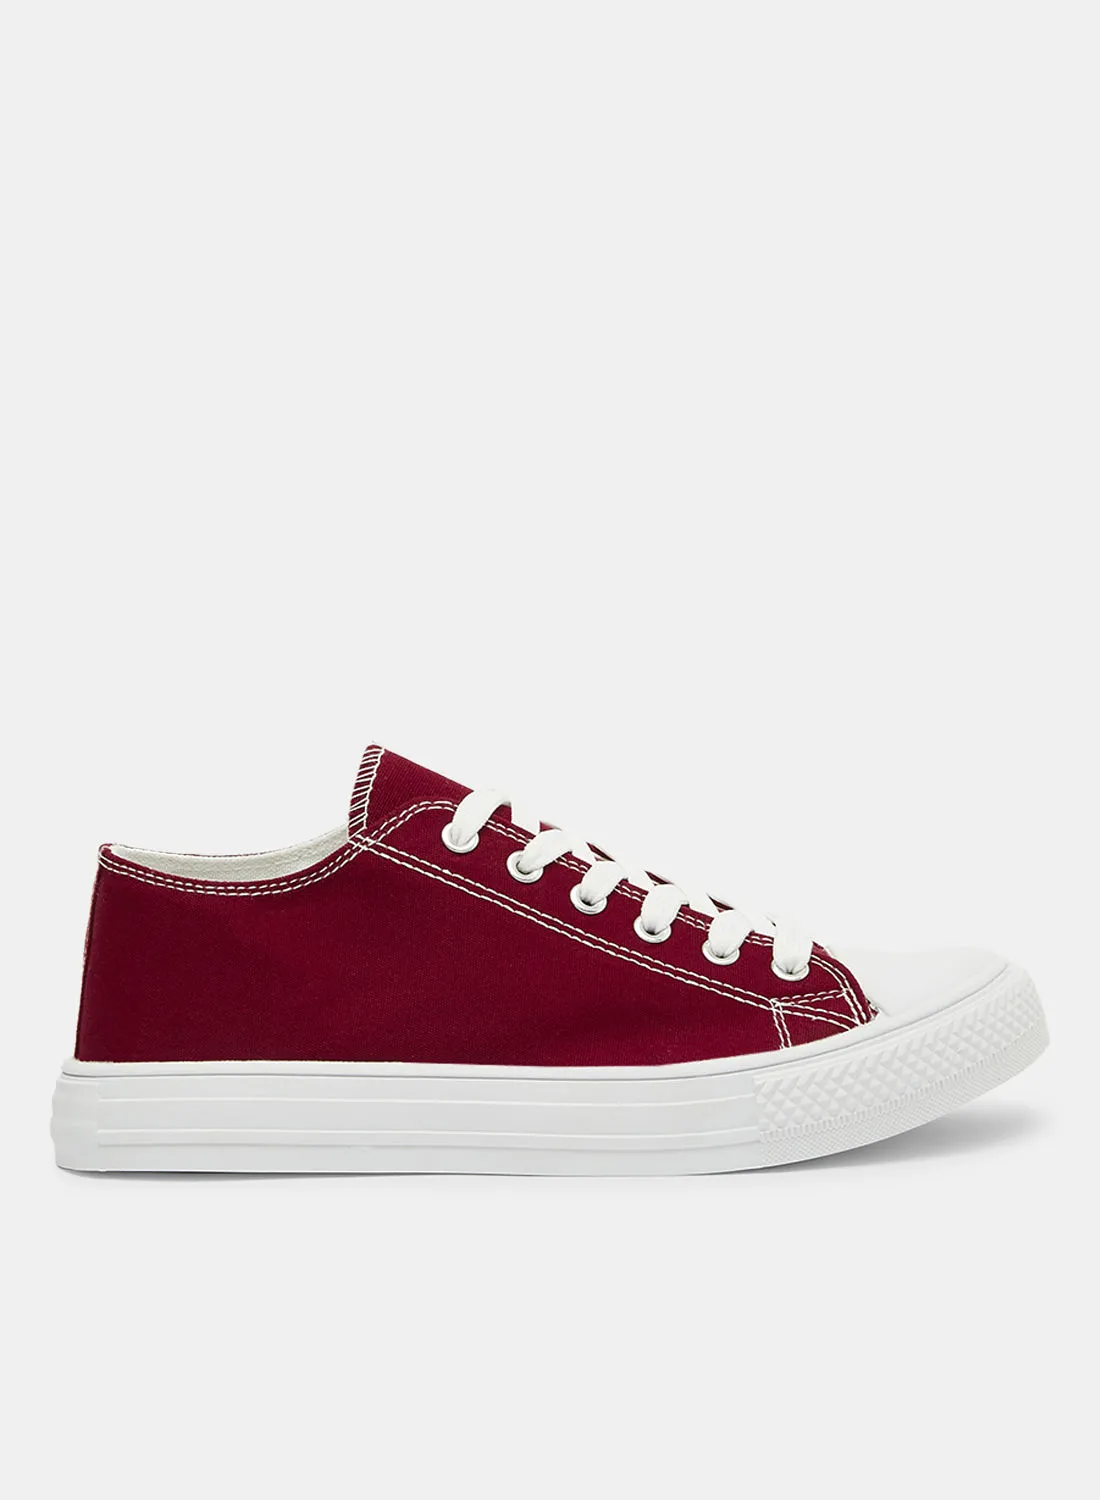 LABEL RAIL Canvas Low Top Sneakers Red